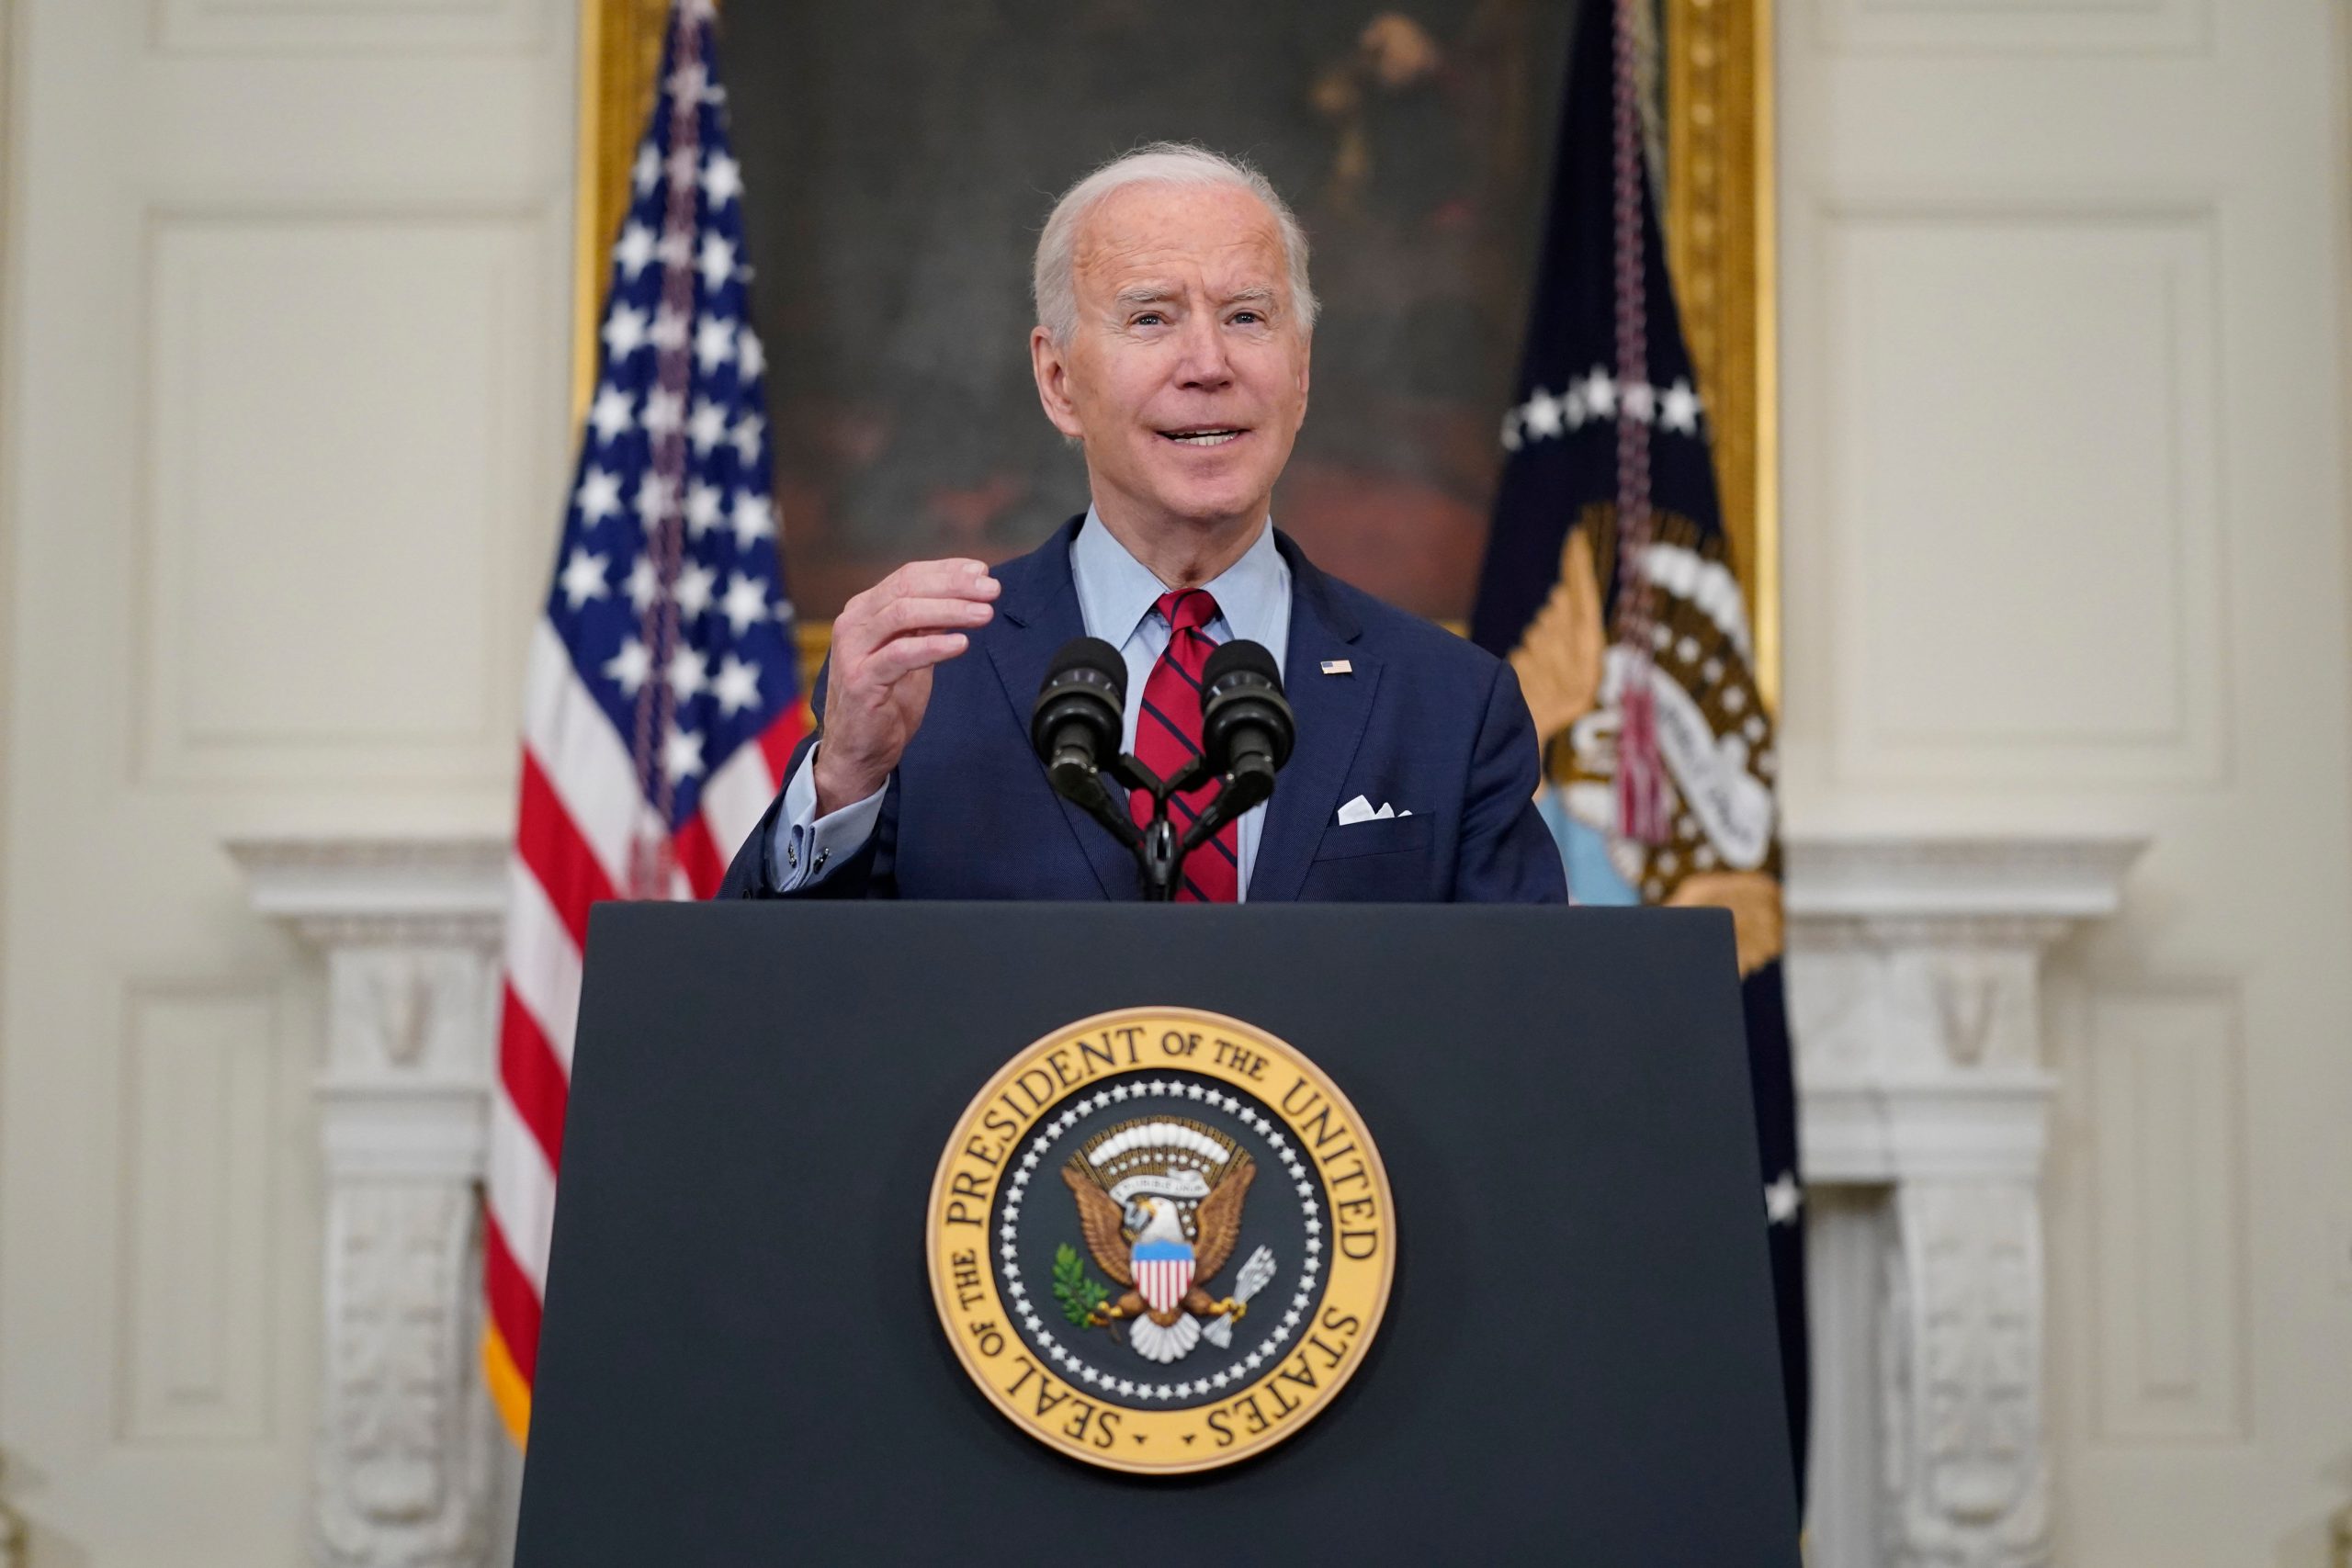 A look at COVID-19 vaccine rollout in US during Joe Biden’s first 100 days in office